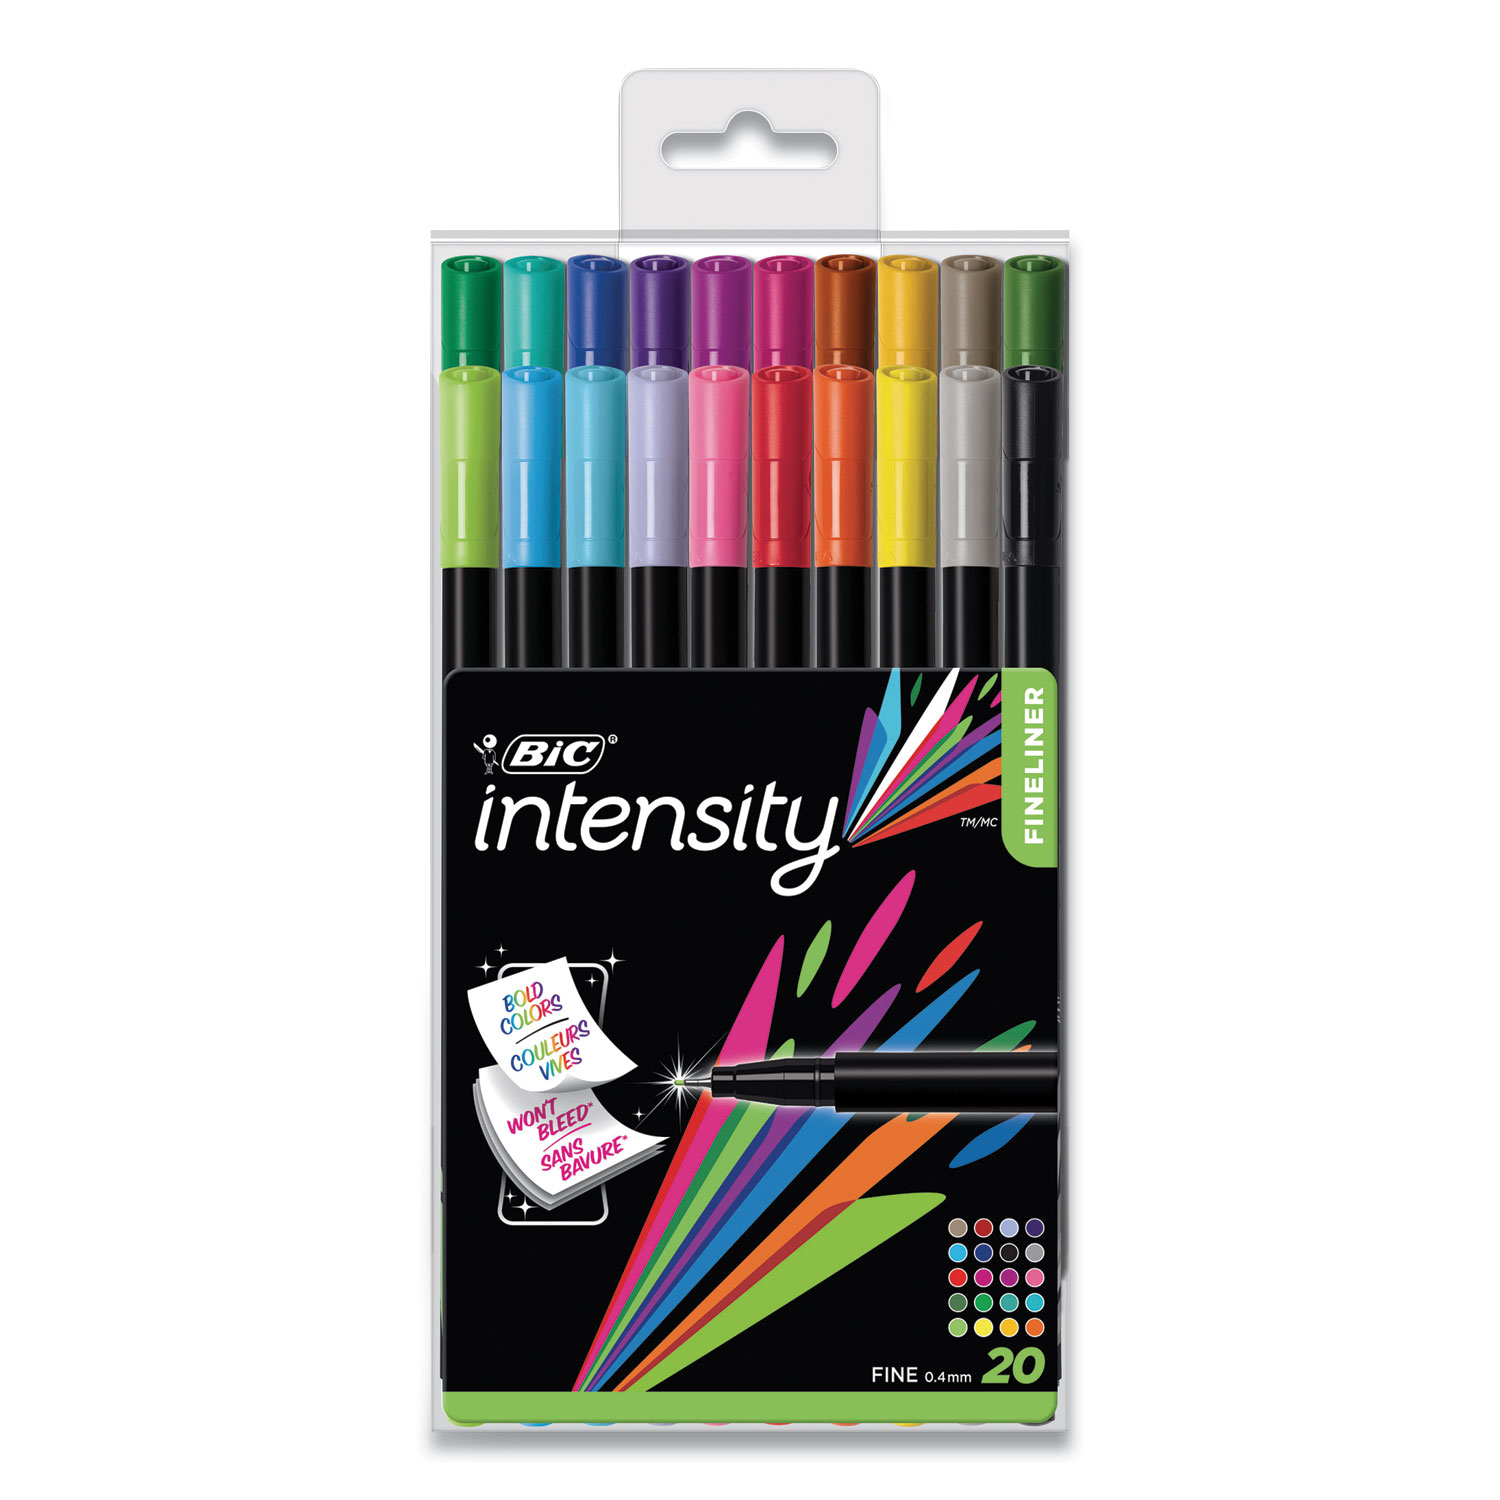  BIC Intensity Fineliner Marker Pen, Fine Point (0.5mm), Red  Marker, Clean & Crisp Writing, 12-Count : Permanent Markers : Office  Products